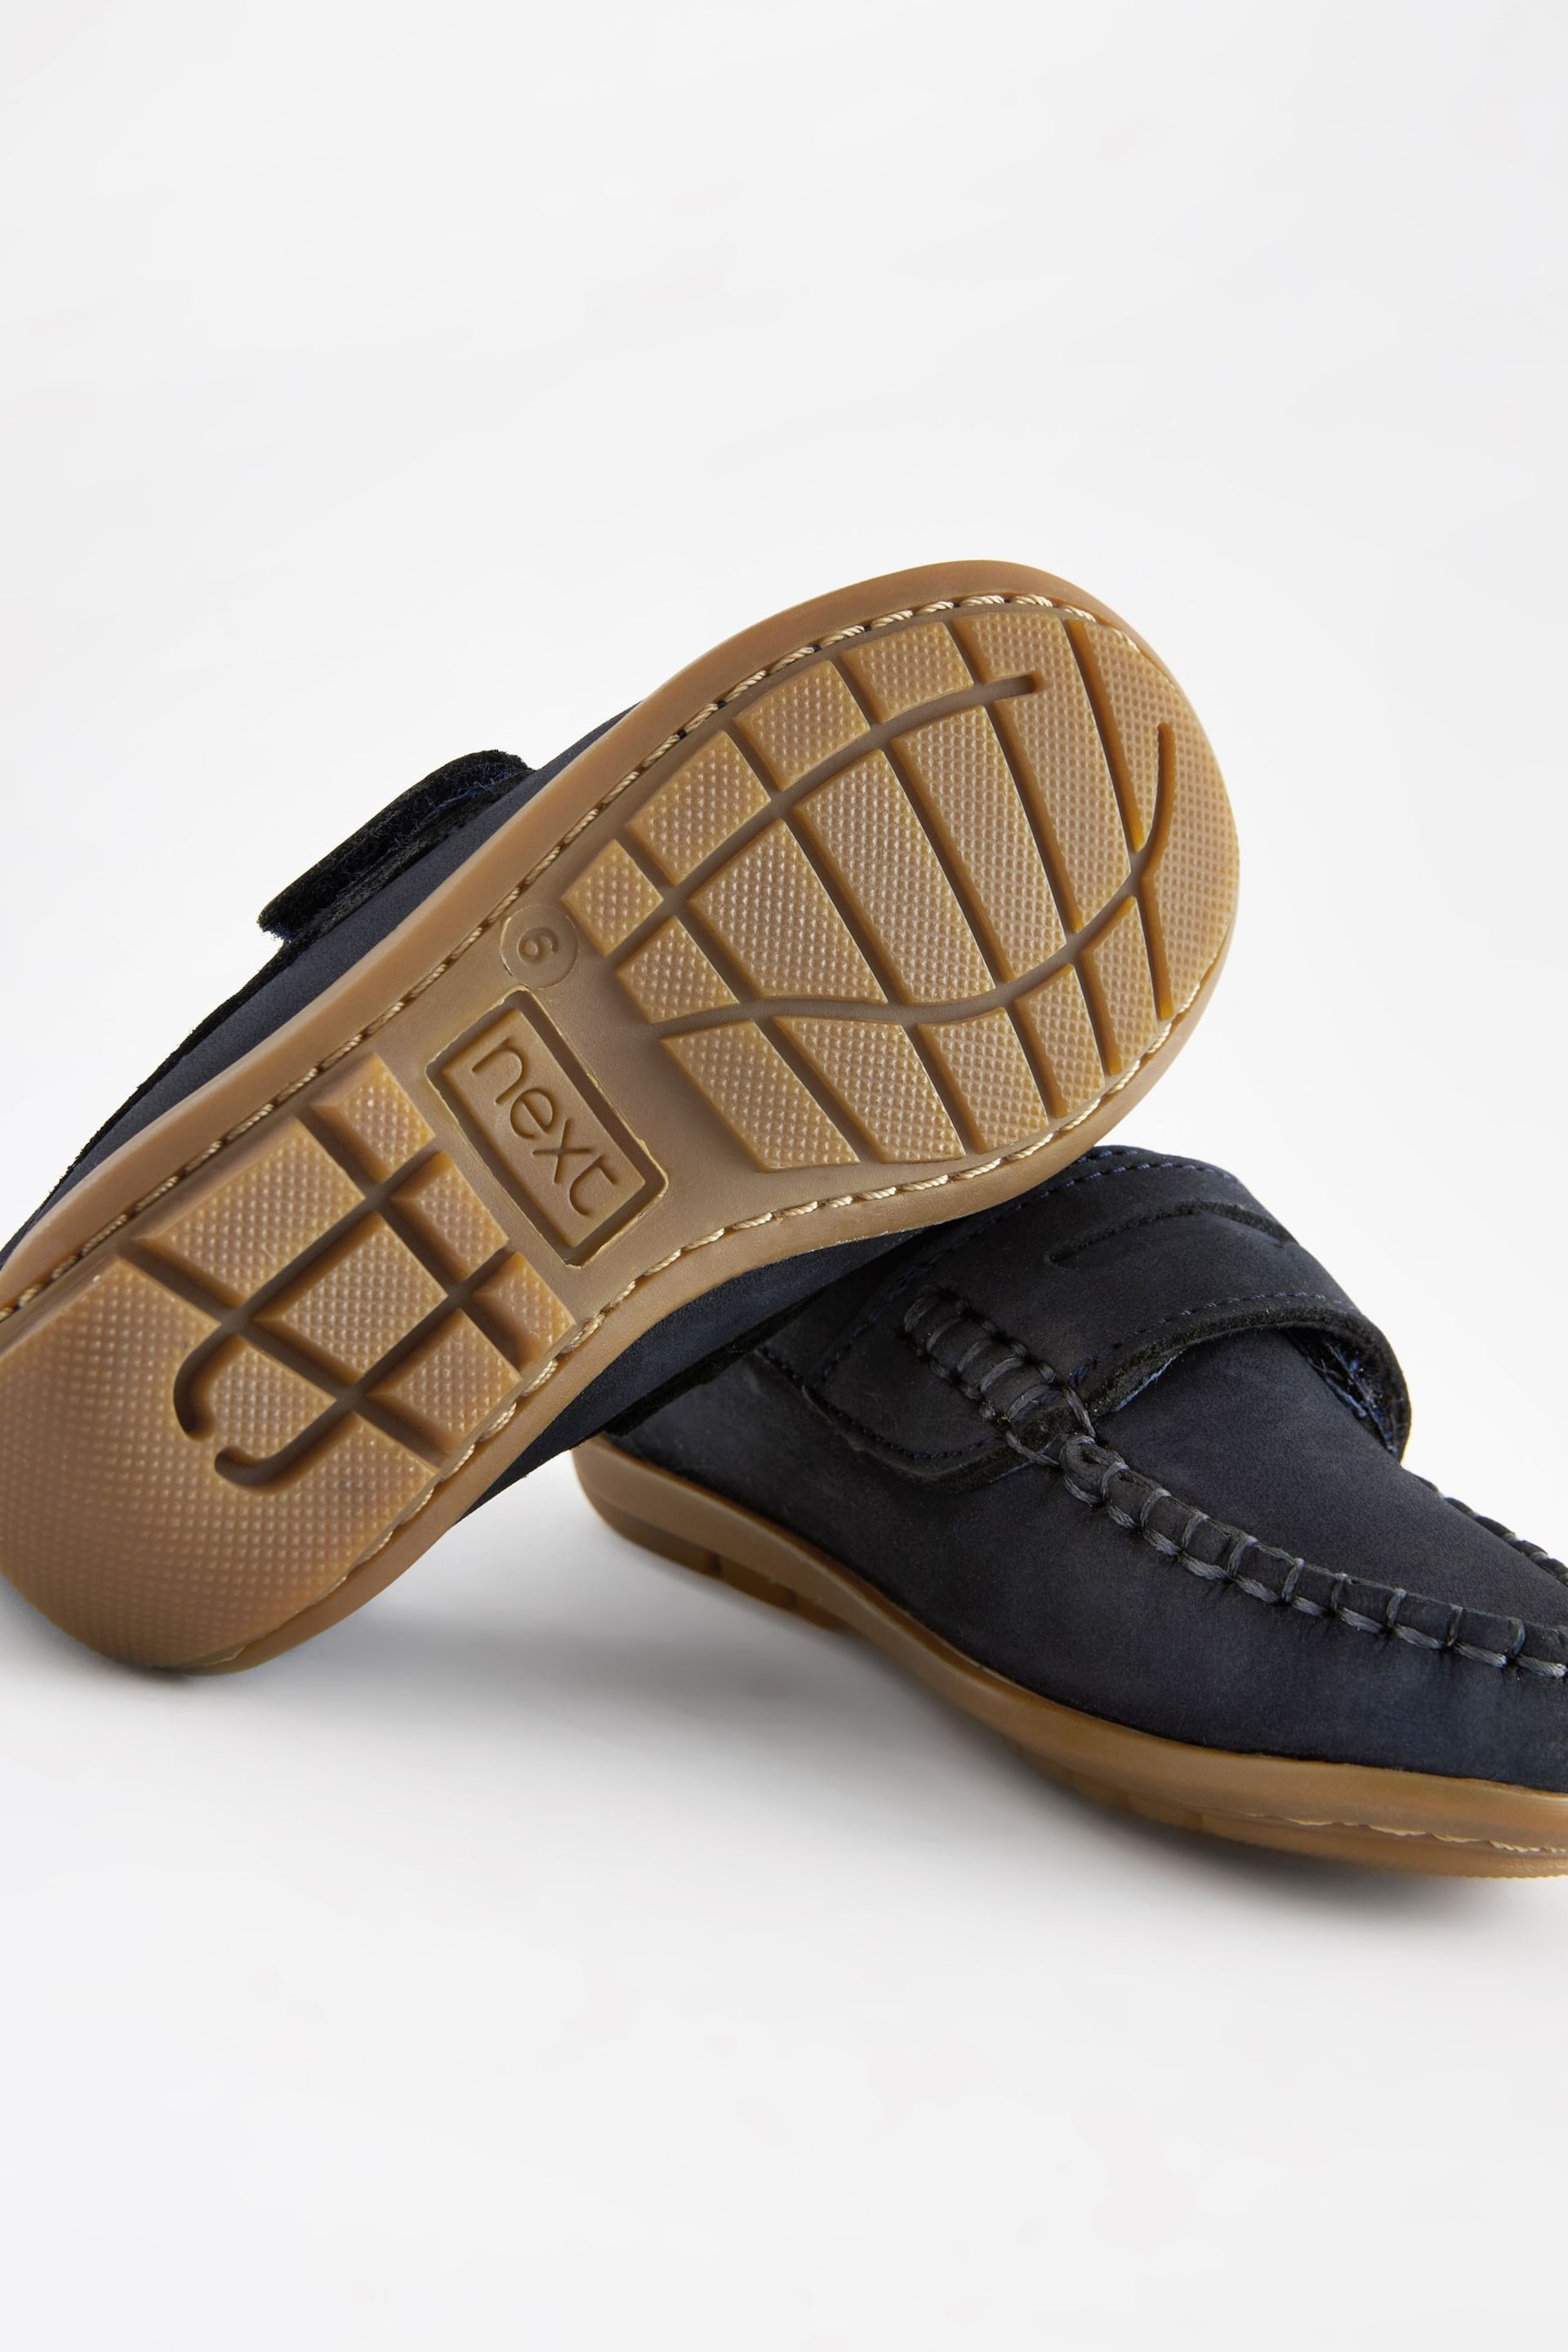 Navy Wide Fit (G) Leather Penny Loafers with Touch and Close Fastening - Image 4 of 7